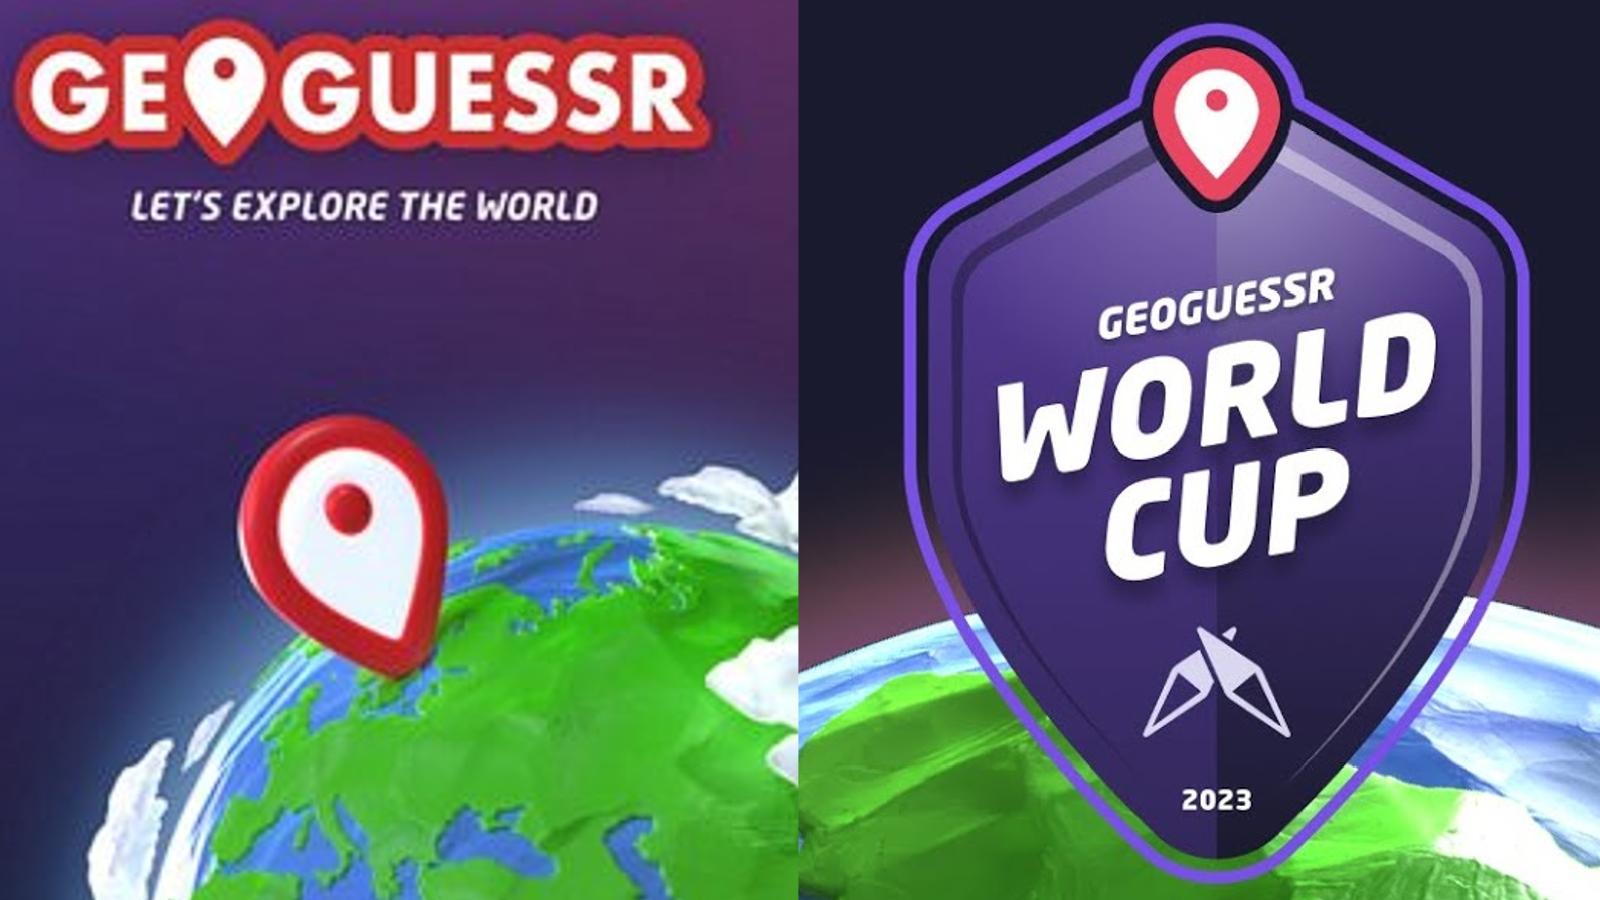 GeoGuessr World Cup